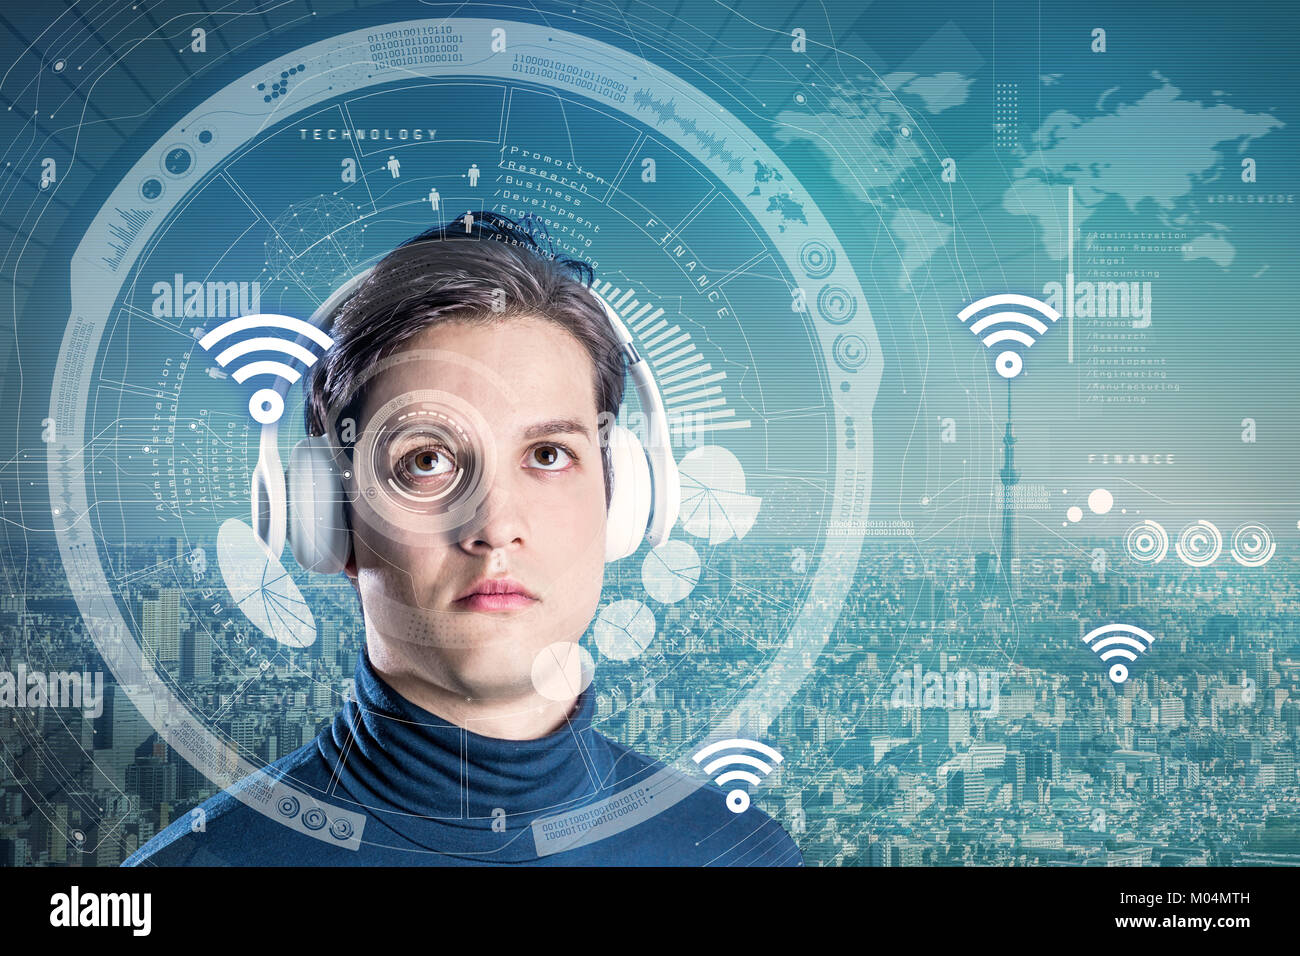 futuristic graphical user interface concept, heads up display, wearable computing, wearable device, internet of things, abstract image visual Stock Photo